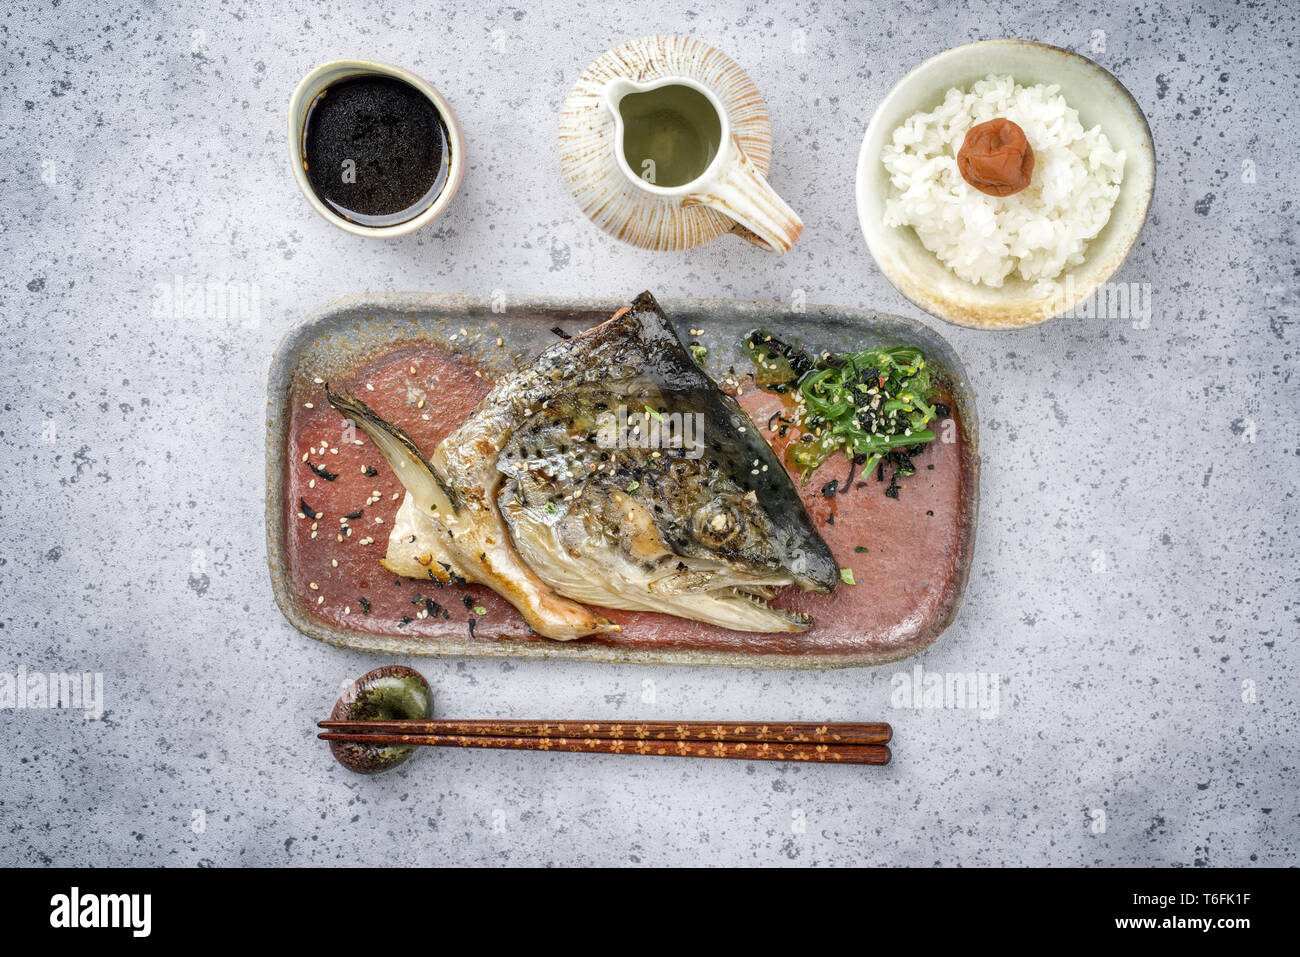 Traditional Barbecue Japanese Kama Yaki Broiled Salmon Fish Head With Rice And Umeboshi As Close Up On A Plate Pro09011 Stock Photo Alamy